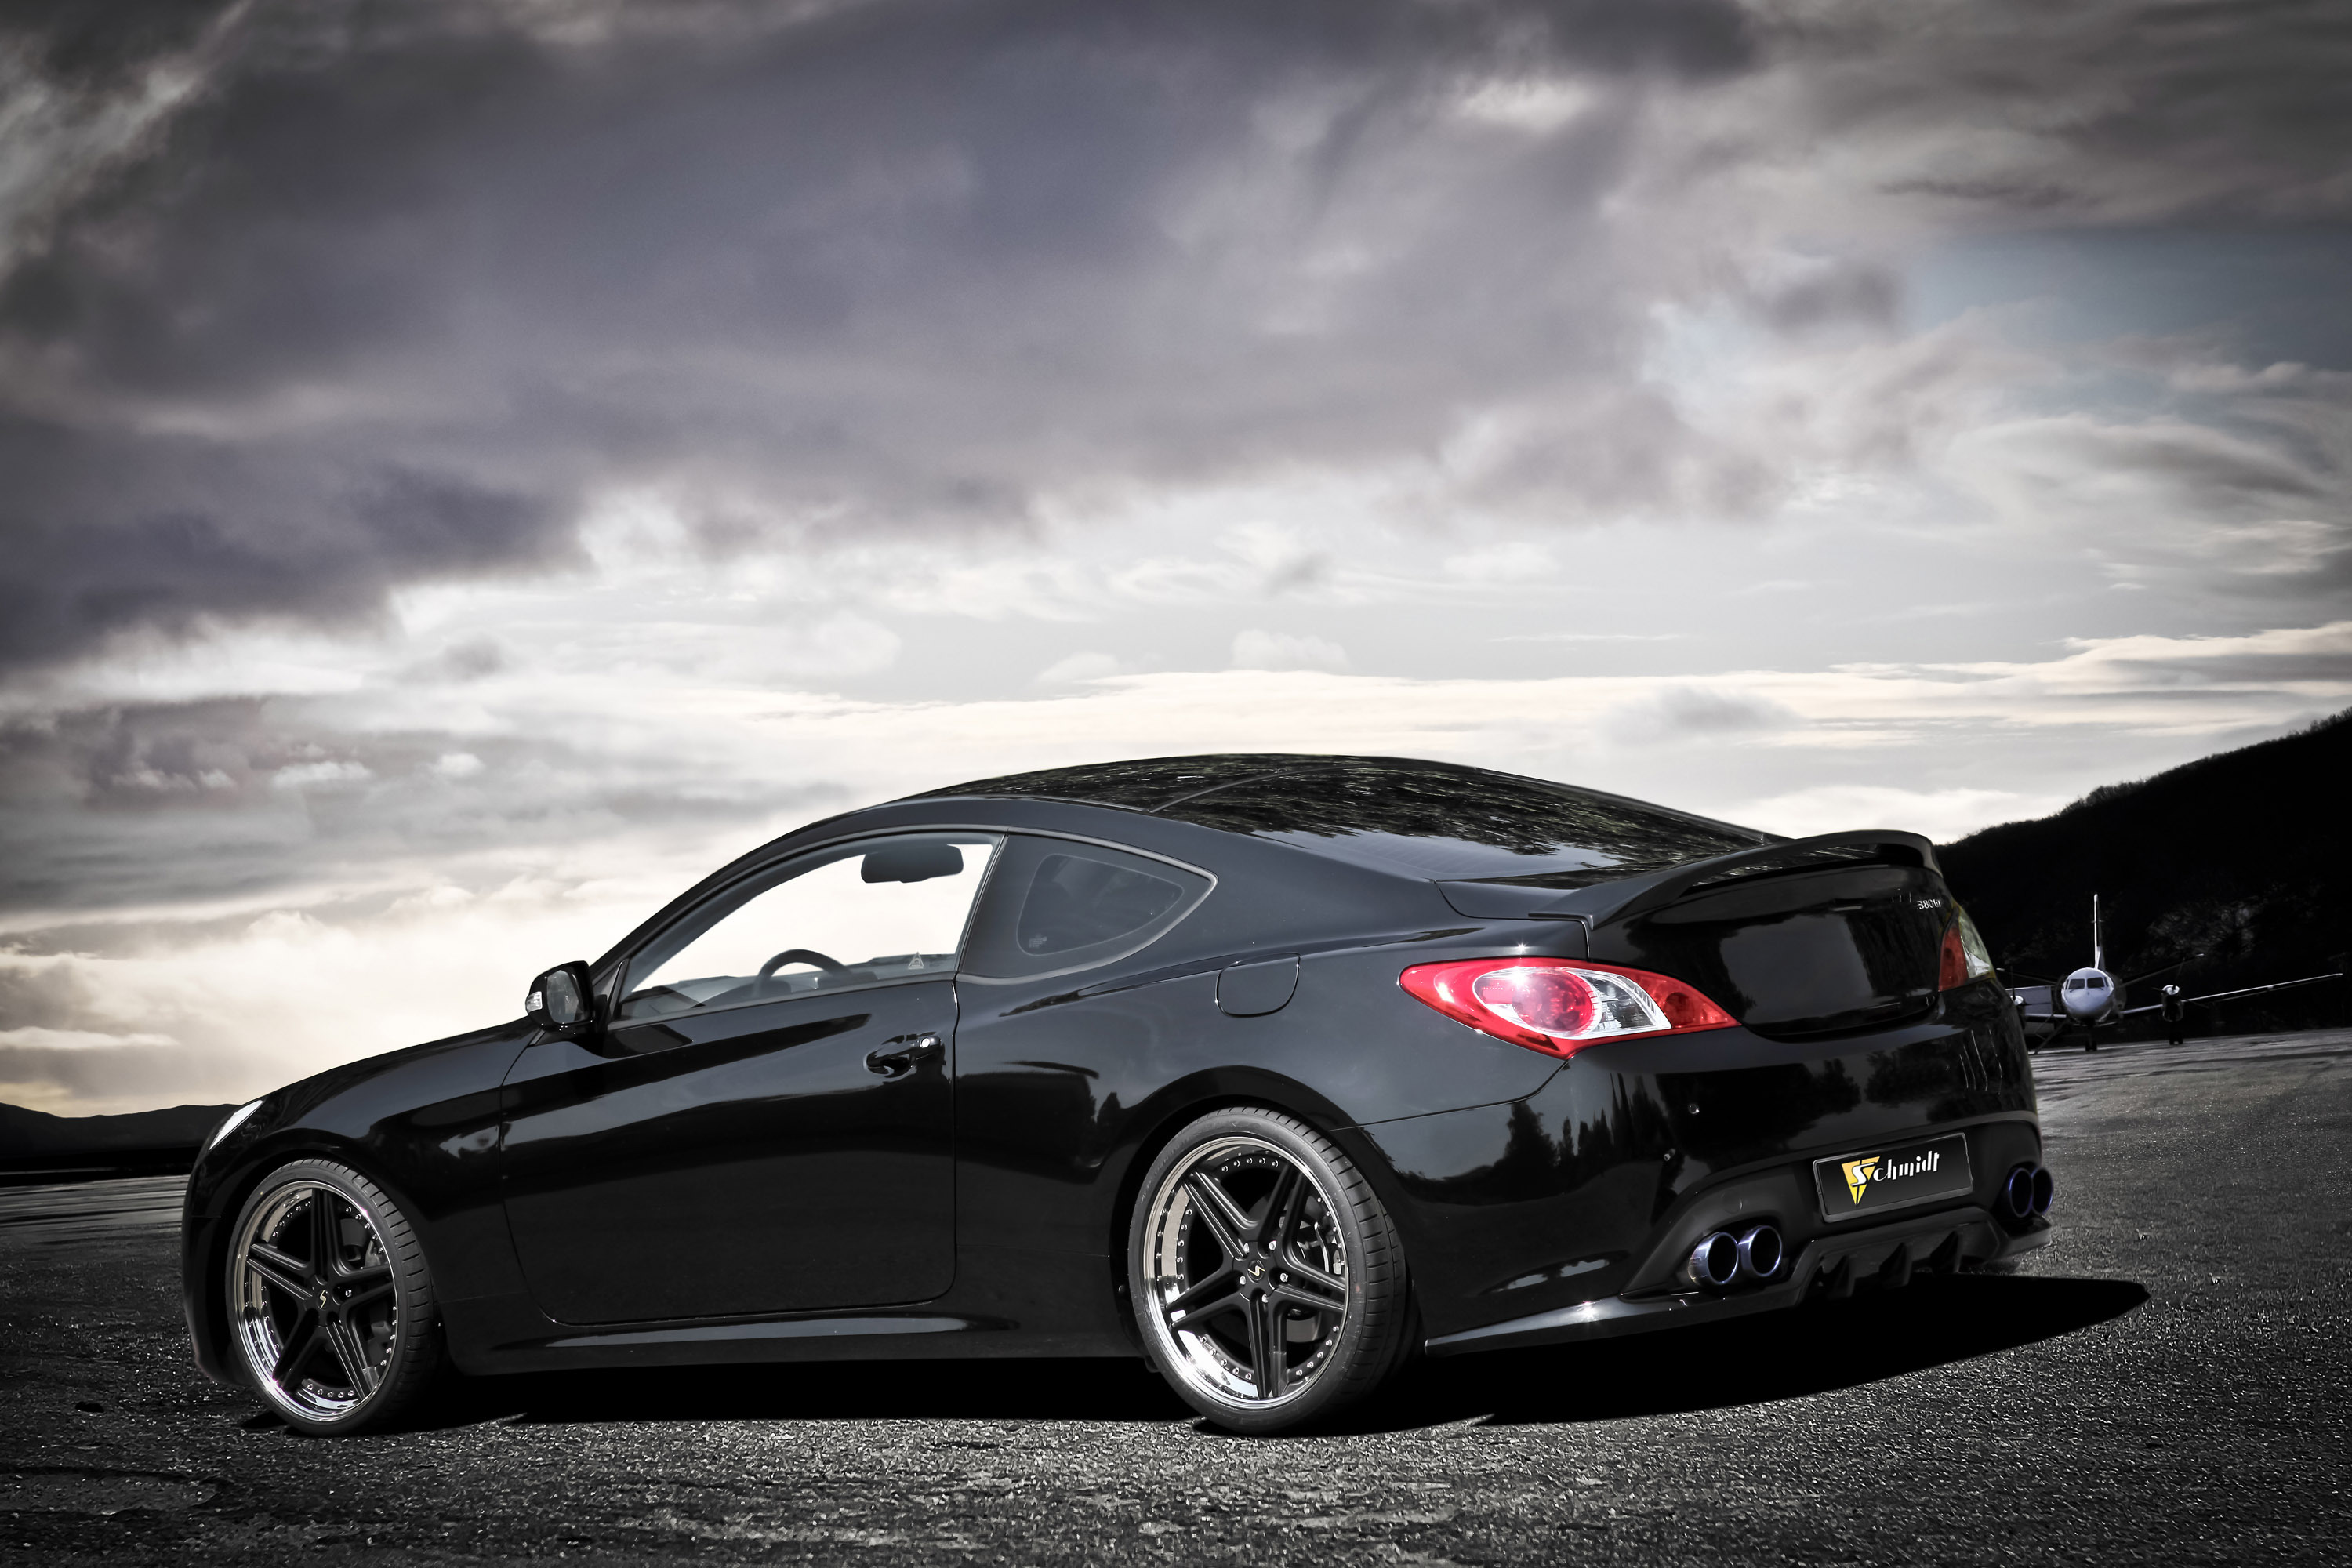 Hyundai Genesis Coupe Wallpaper Image Photos Pictures Background